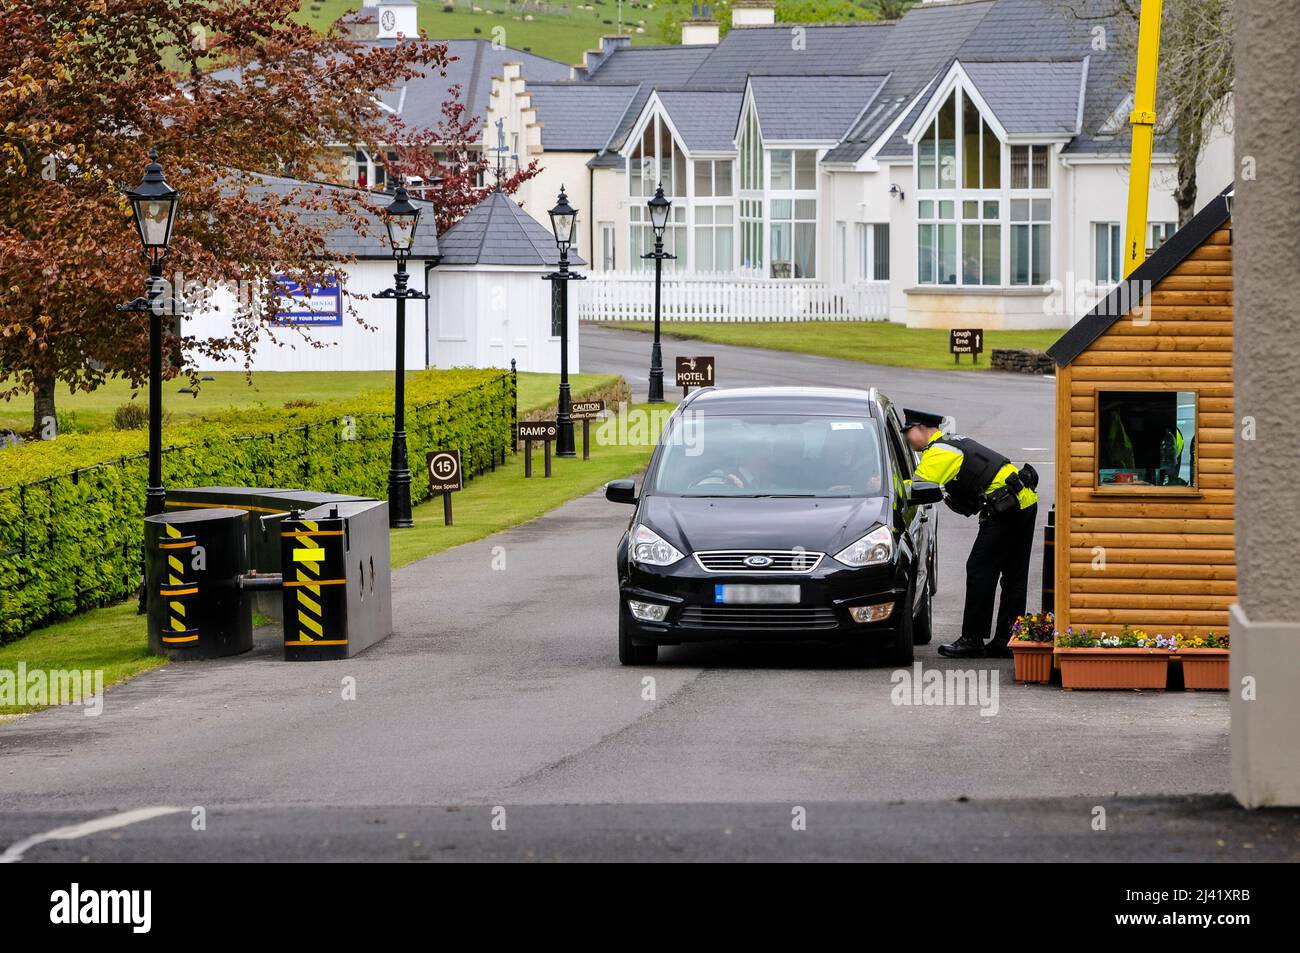 26/05/2013, Enniskillen, County Fermanagh, Northern Ireland.  A PSNI officer questions a departing driver as security is significantly increased at the entrance of the Lough Erne Golf Resort ahead of the G8 Summit, due to be held on the 17th and 18th June 2013. Stock Photo